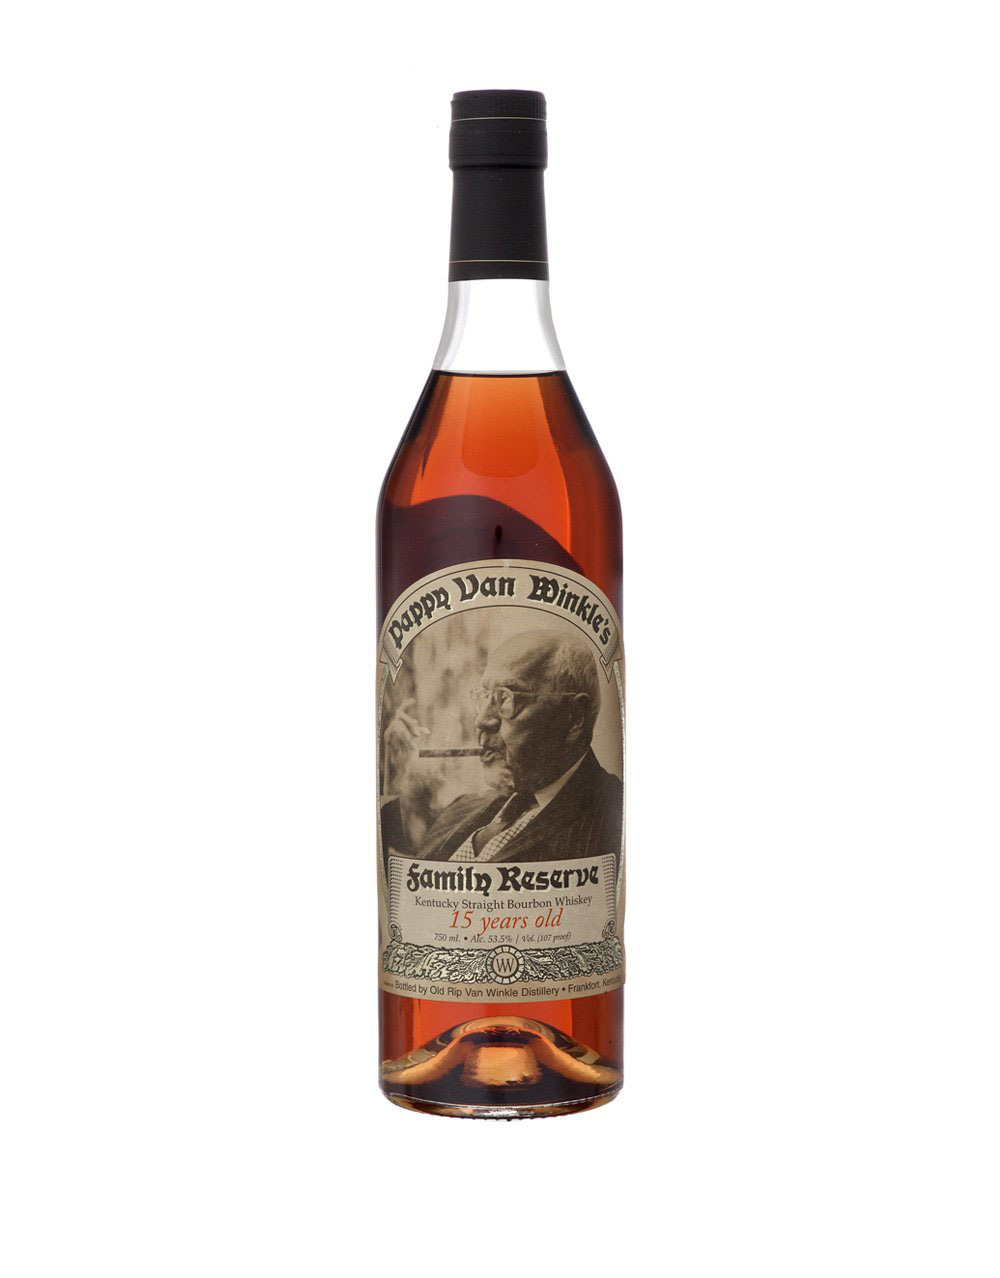 Pappy Van Winkles Family Reserve 15 Year Old Bourbon Whiskey